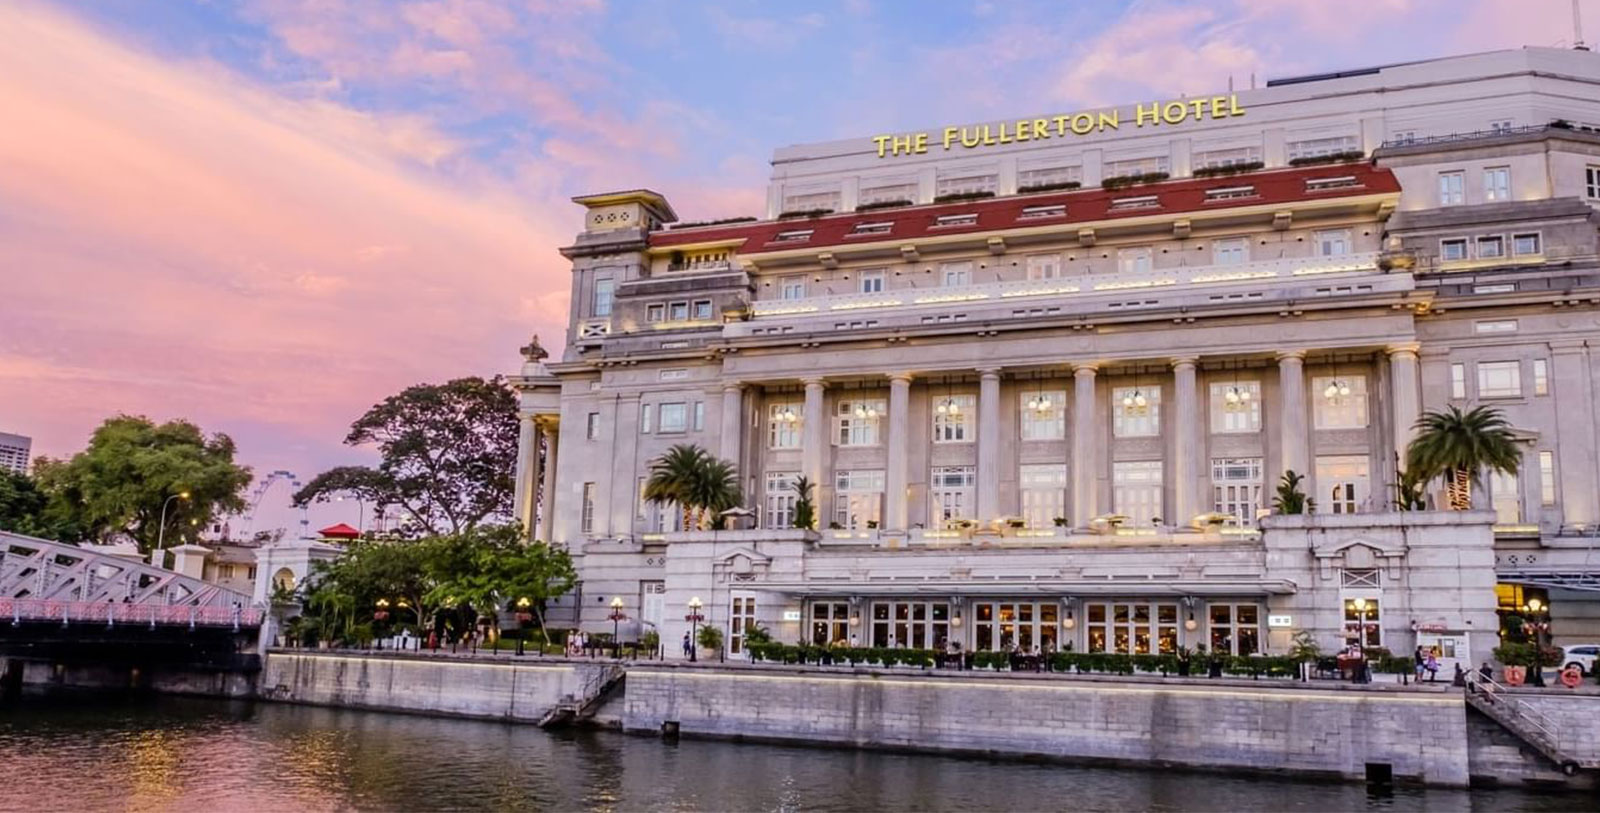 Image of Hotel Exterior The Fullerton Hotel Singapore, 1924, Member of Historic Hotels Worldwide, in Singapore, Overview